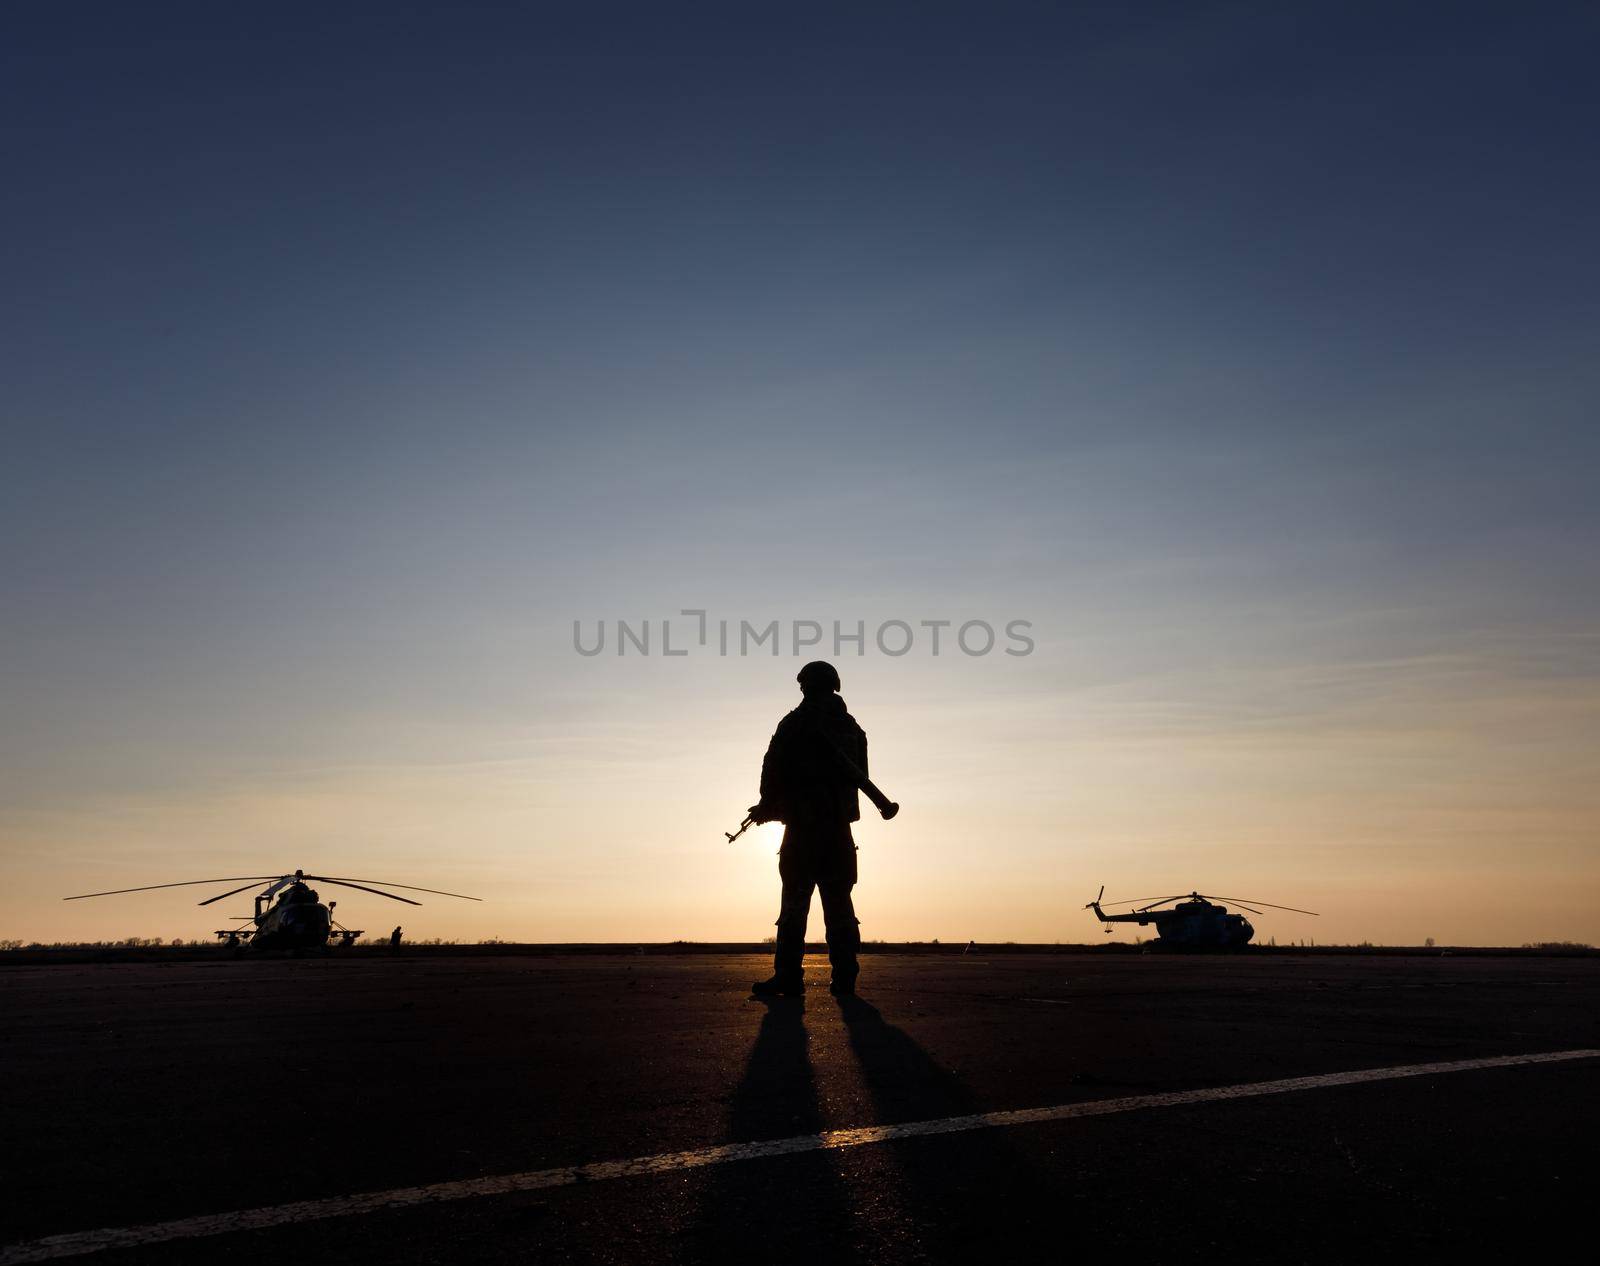 MARIUPOL, UKRAINE - Nov. 16, 2017: Silhouette of a military man with a machine gun in a combat post against the helicopters and sunset sky during festivities on occasion of the Day of Naval Infantry